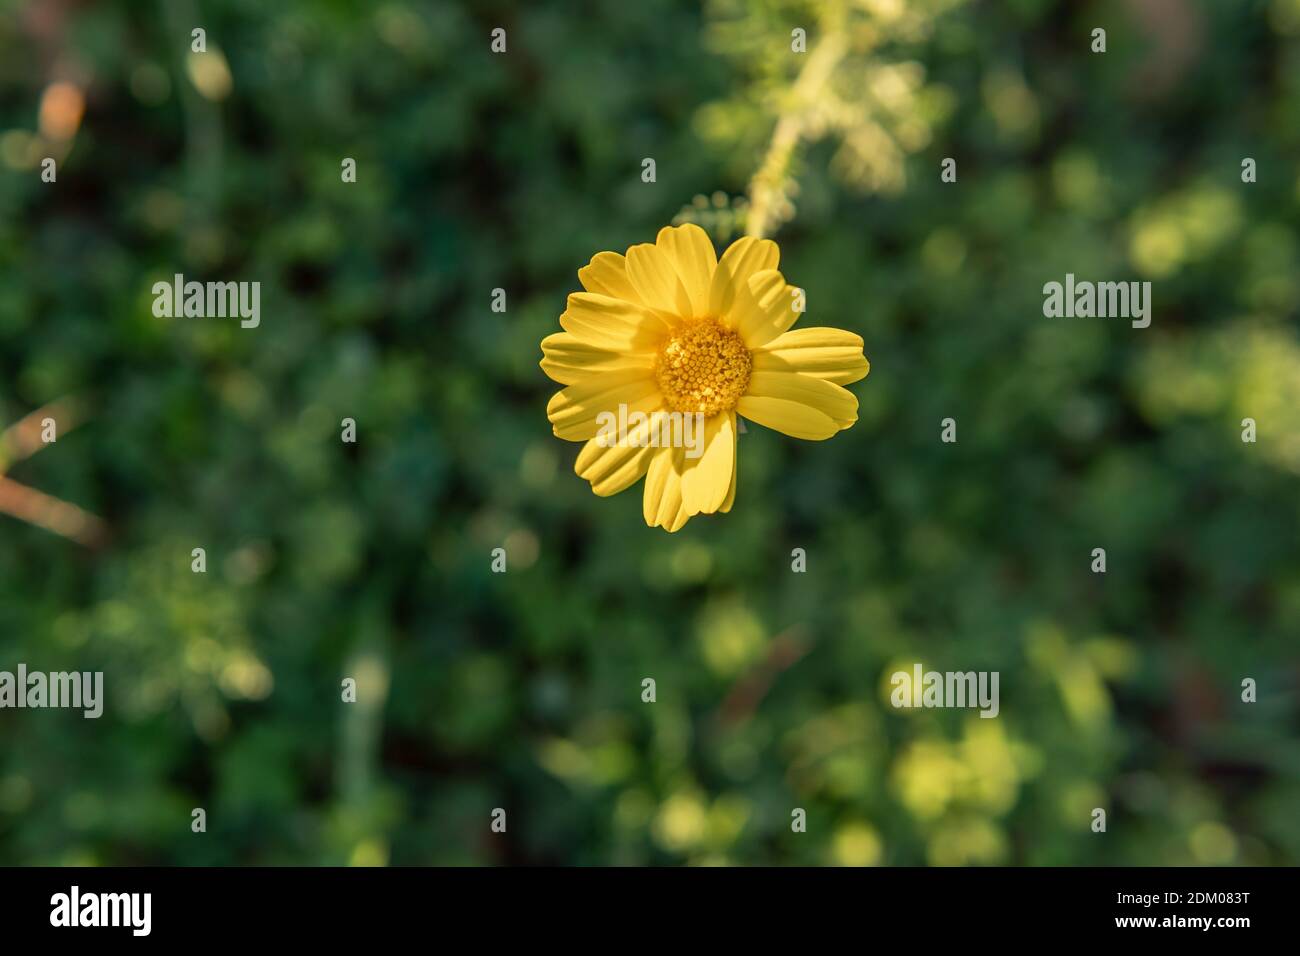 Close-up of a daisy flower on a green nature background. Spain Stock Photo